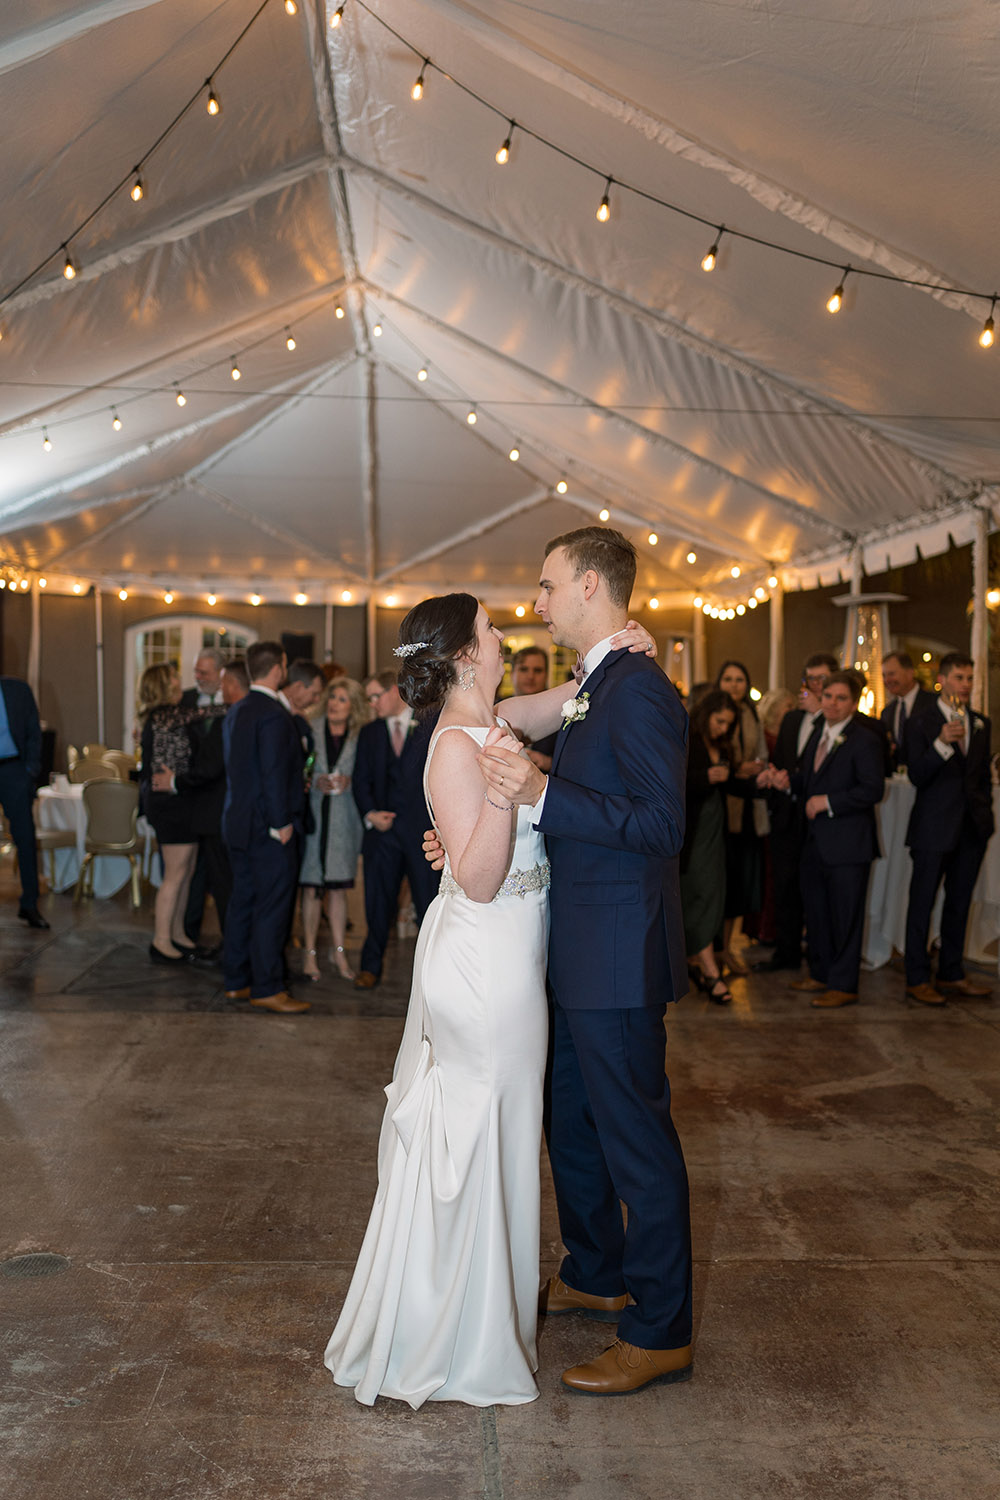 Shelby and Brody's first dance to Elvis Presley's "Can't Help Falling in Love."